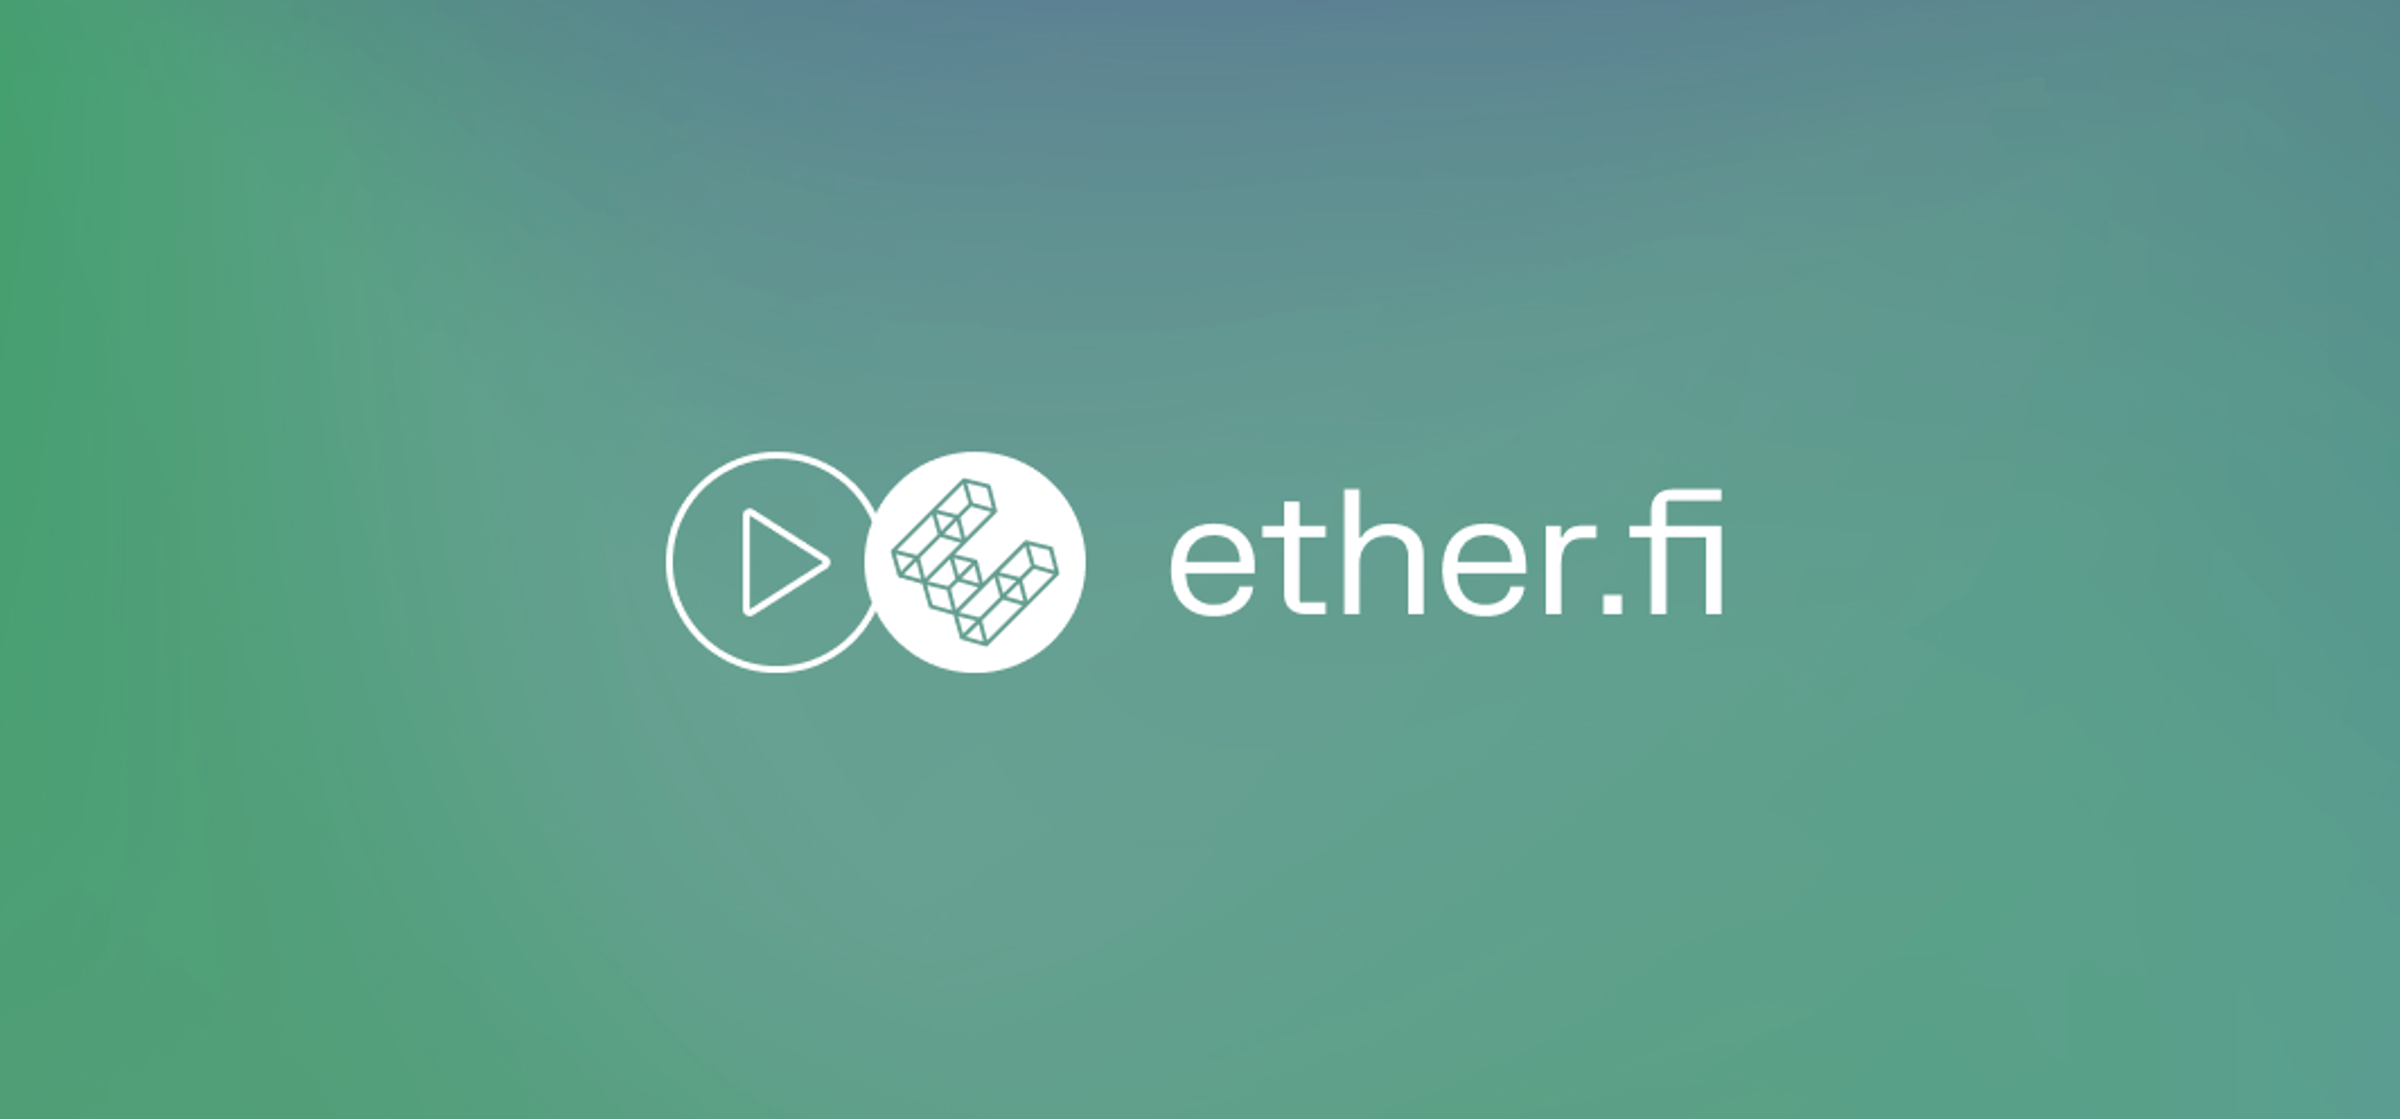 ether.fi launches eETH: non-custodial staking and native restaking